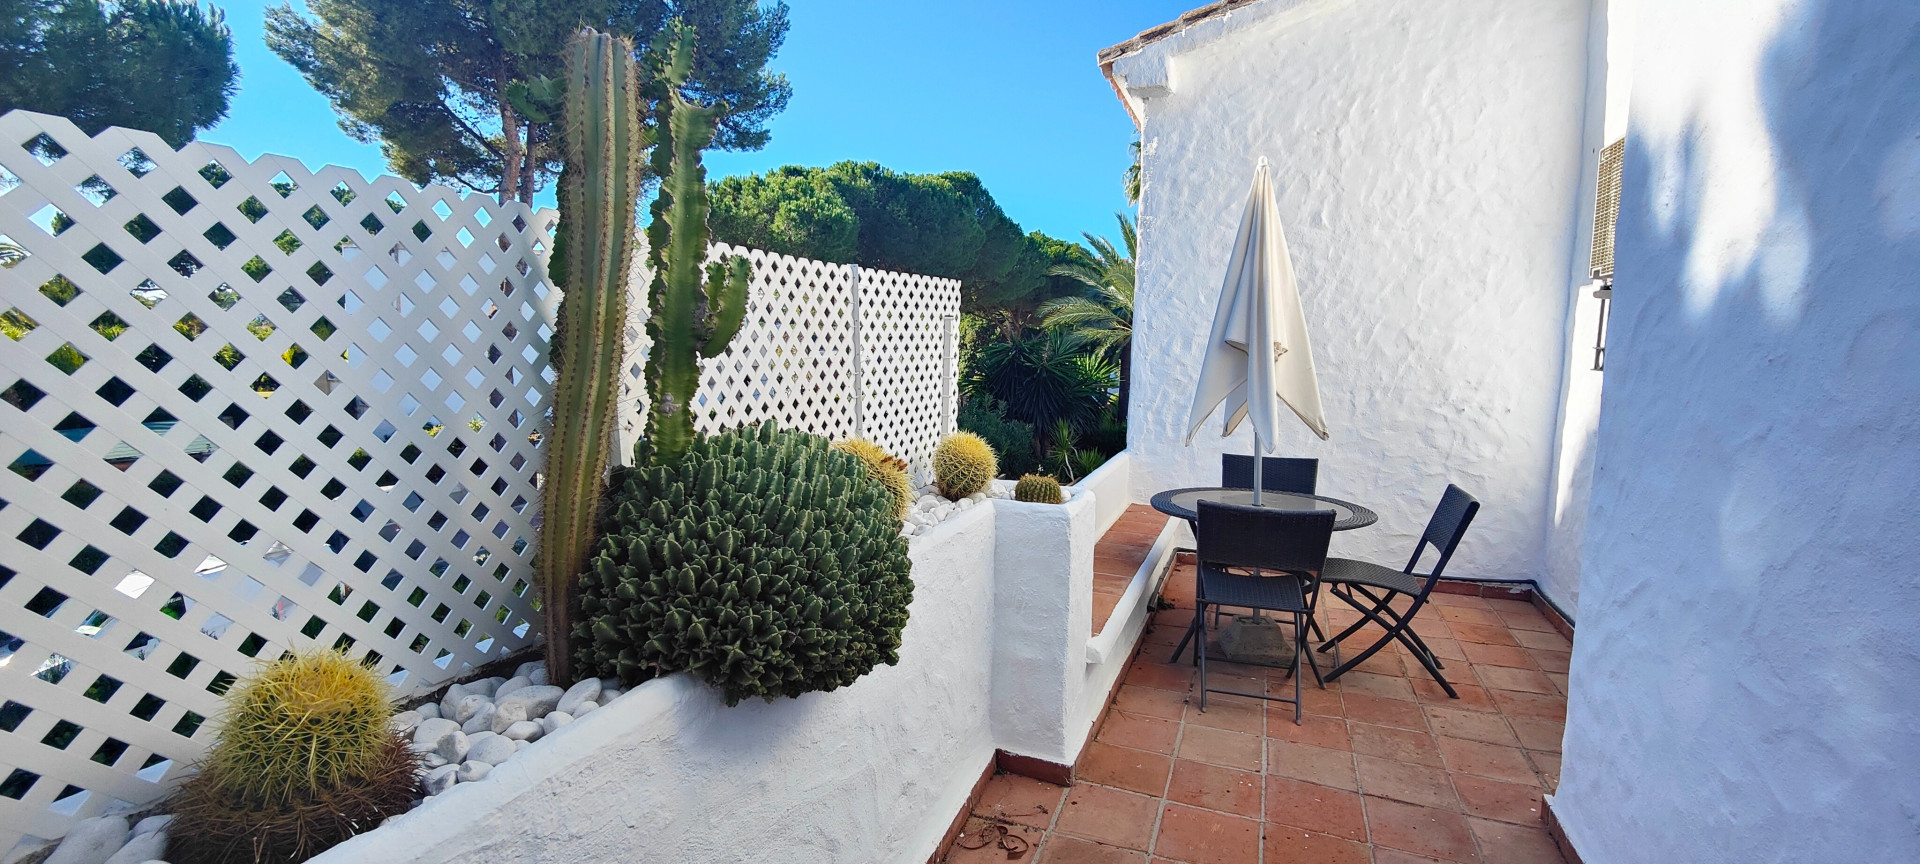 Completely renovated townhouse with private garden in Los Naranjos